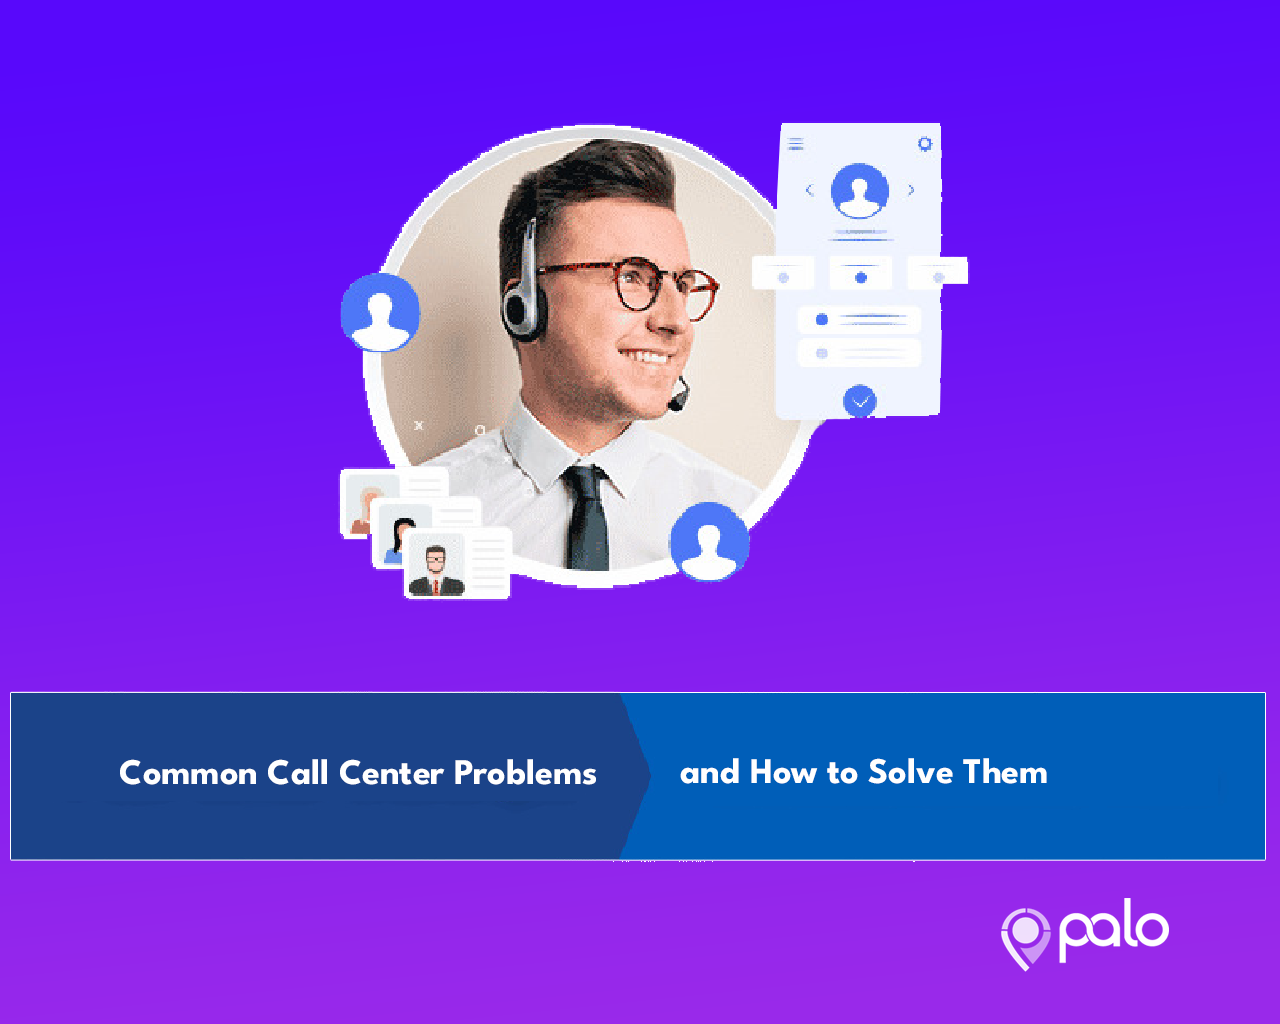 Common Call Center Problems and Their Solutions